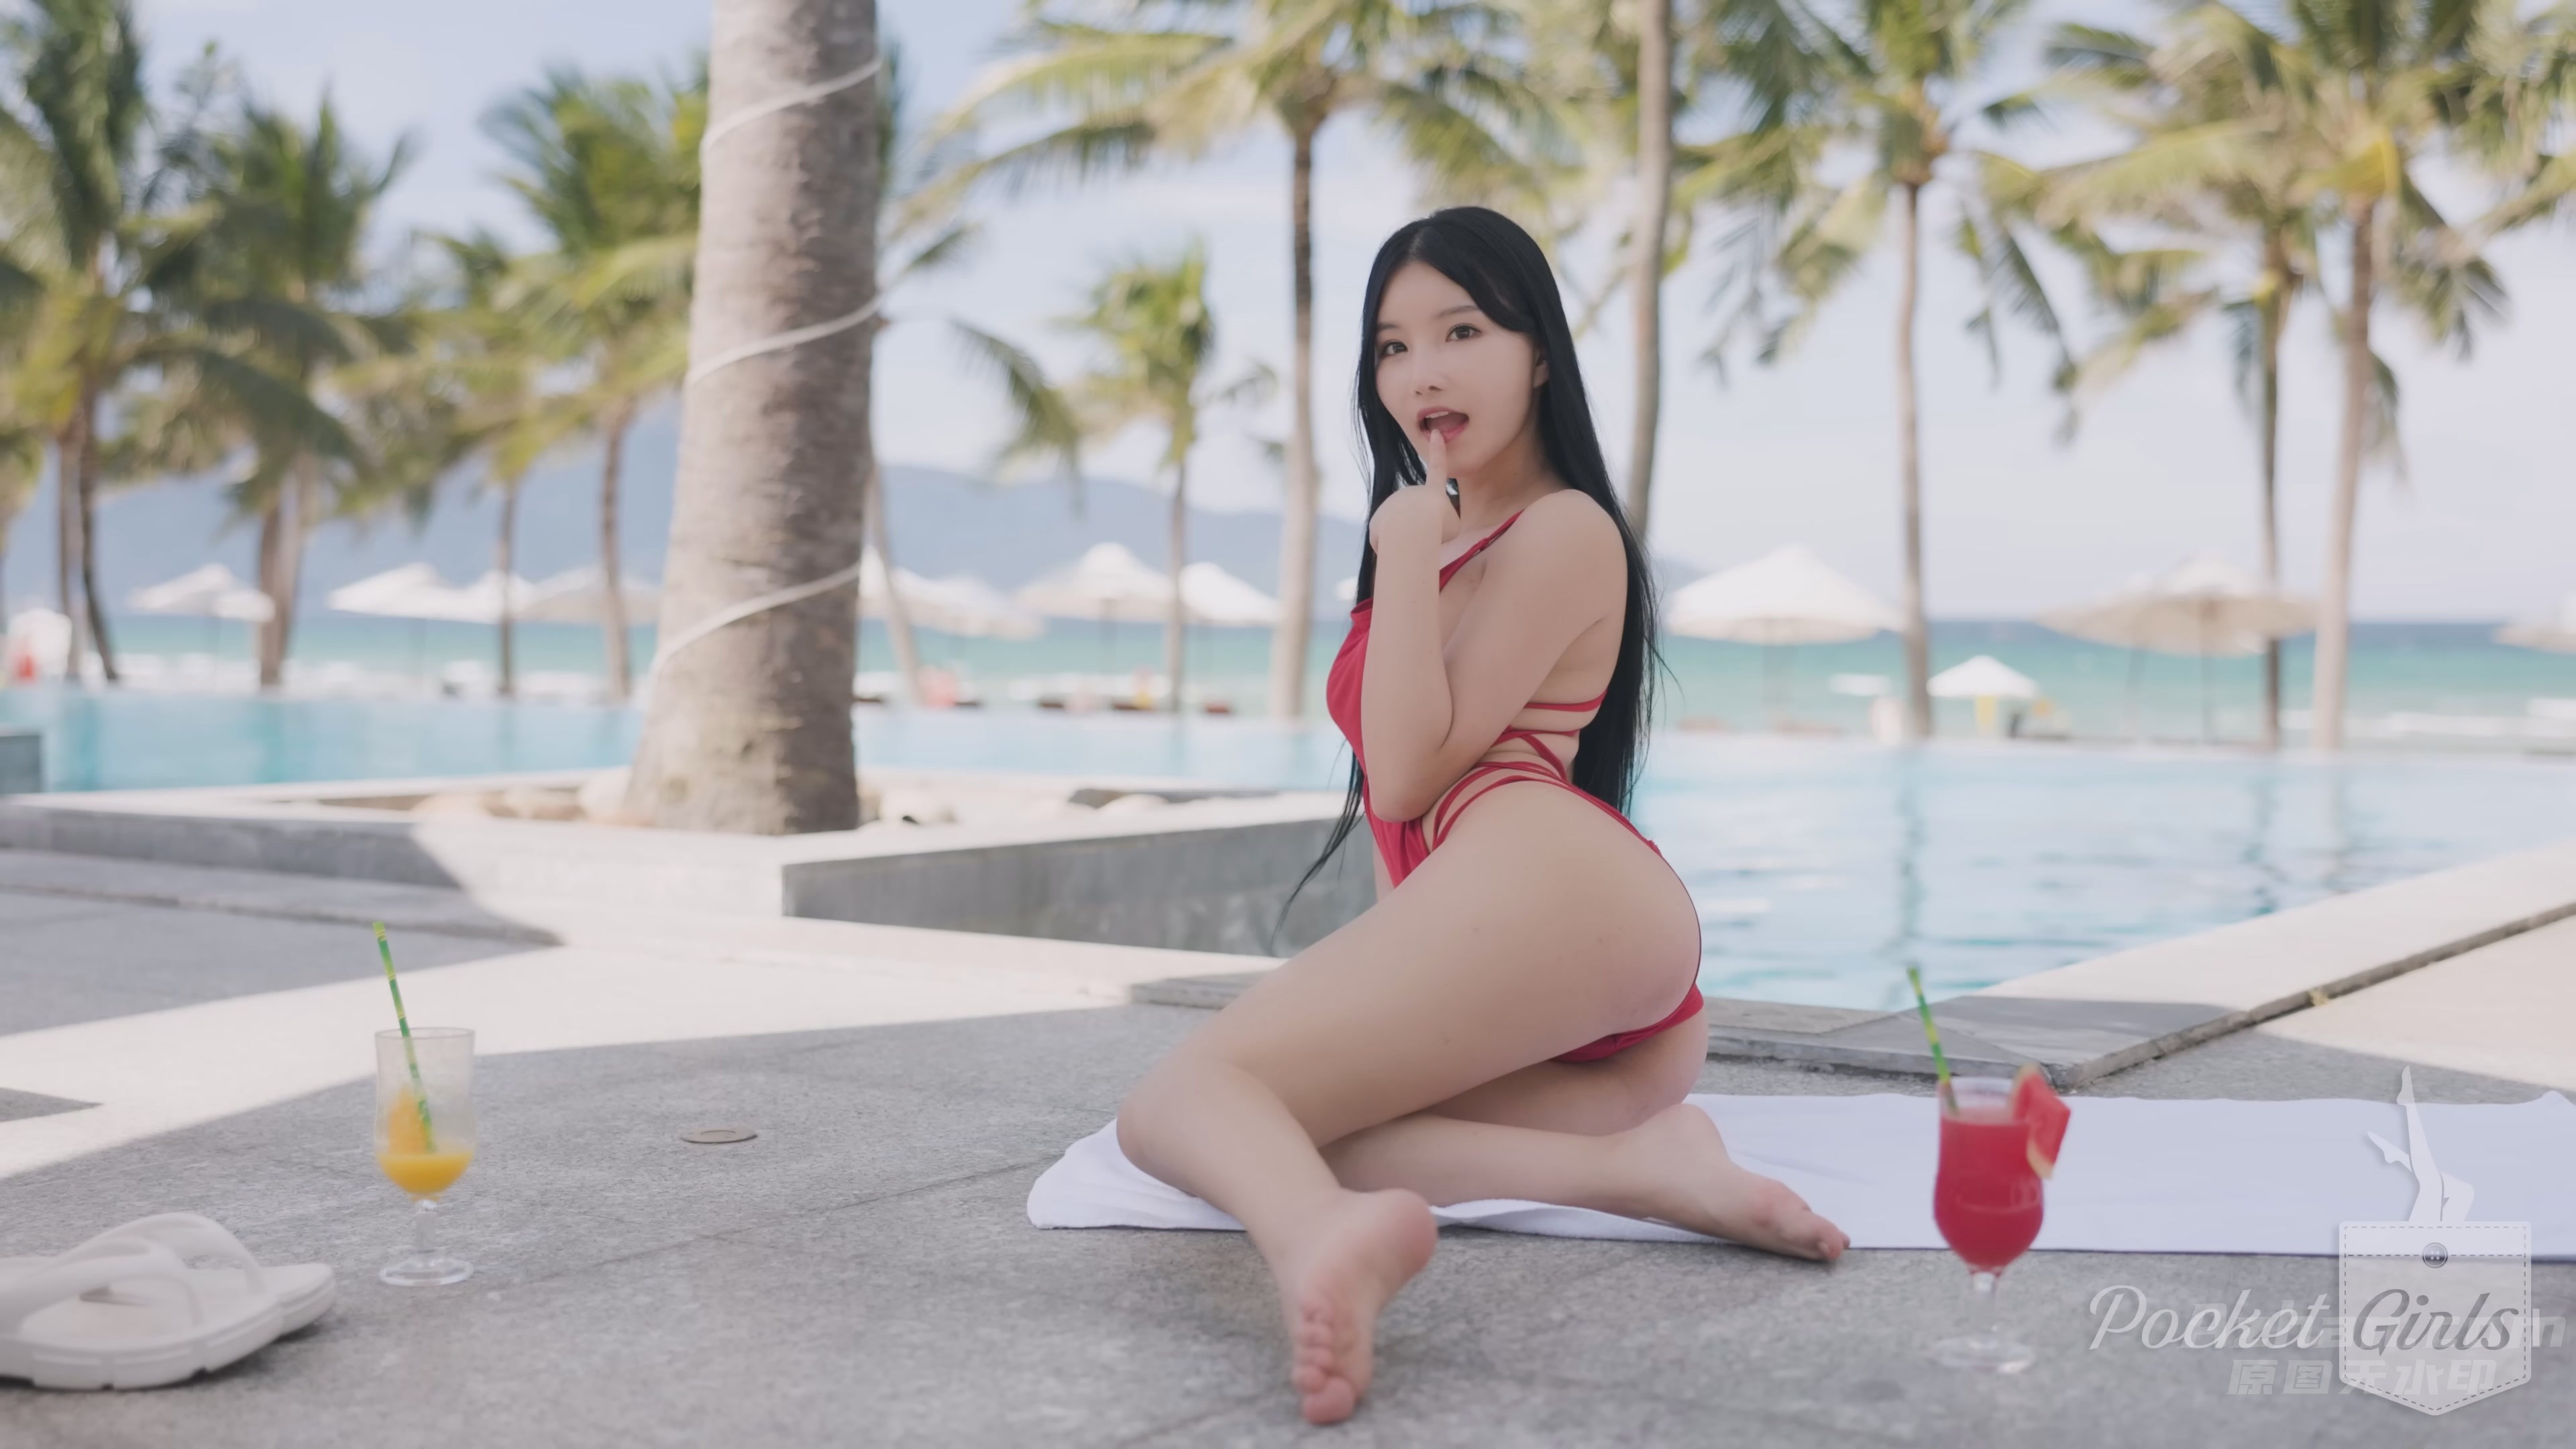 A88 Pool Wading in Vibrant Red Monokini, Yeonji, Pocket Girls, 412M-4